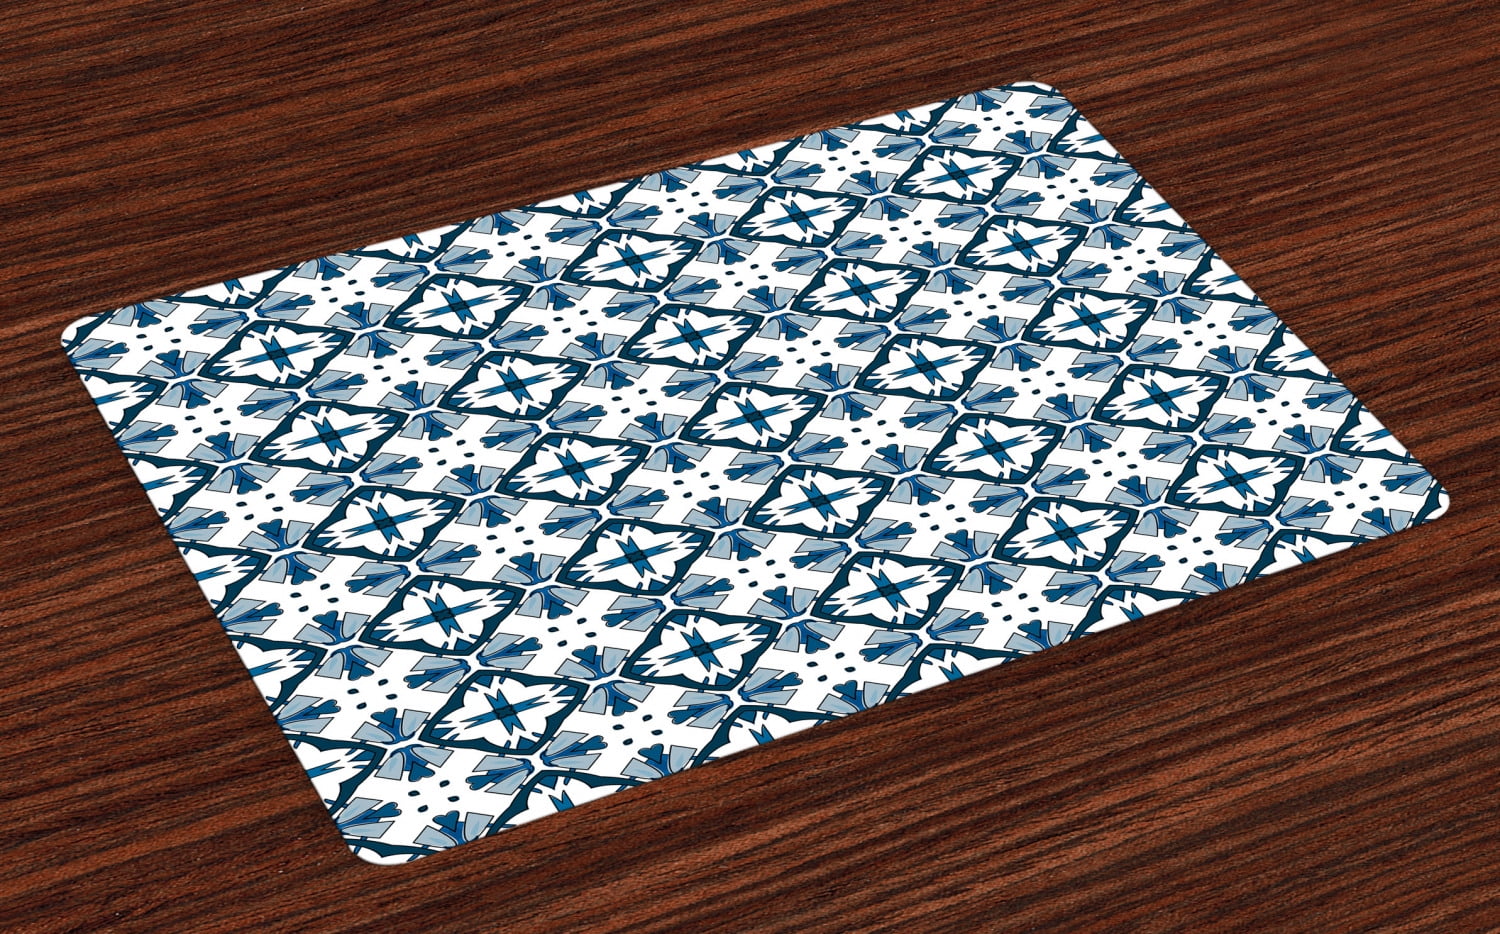 Blue and White Placemats Set of 4 Traditional Portuguese Azulejo Tiles Pattern Illustration